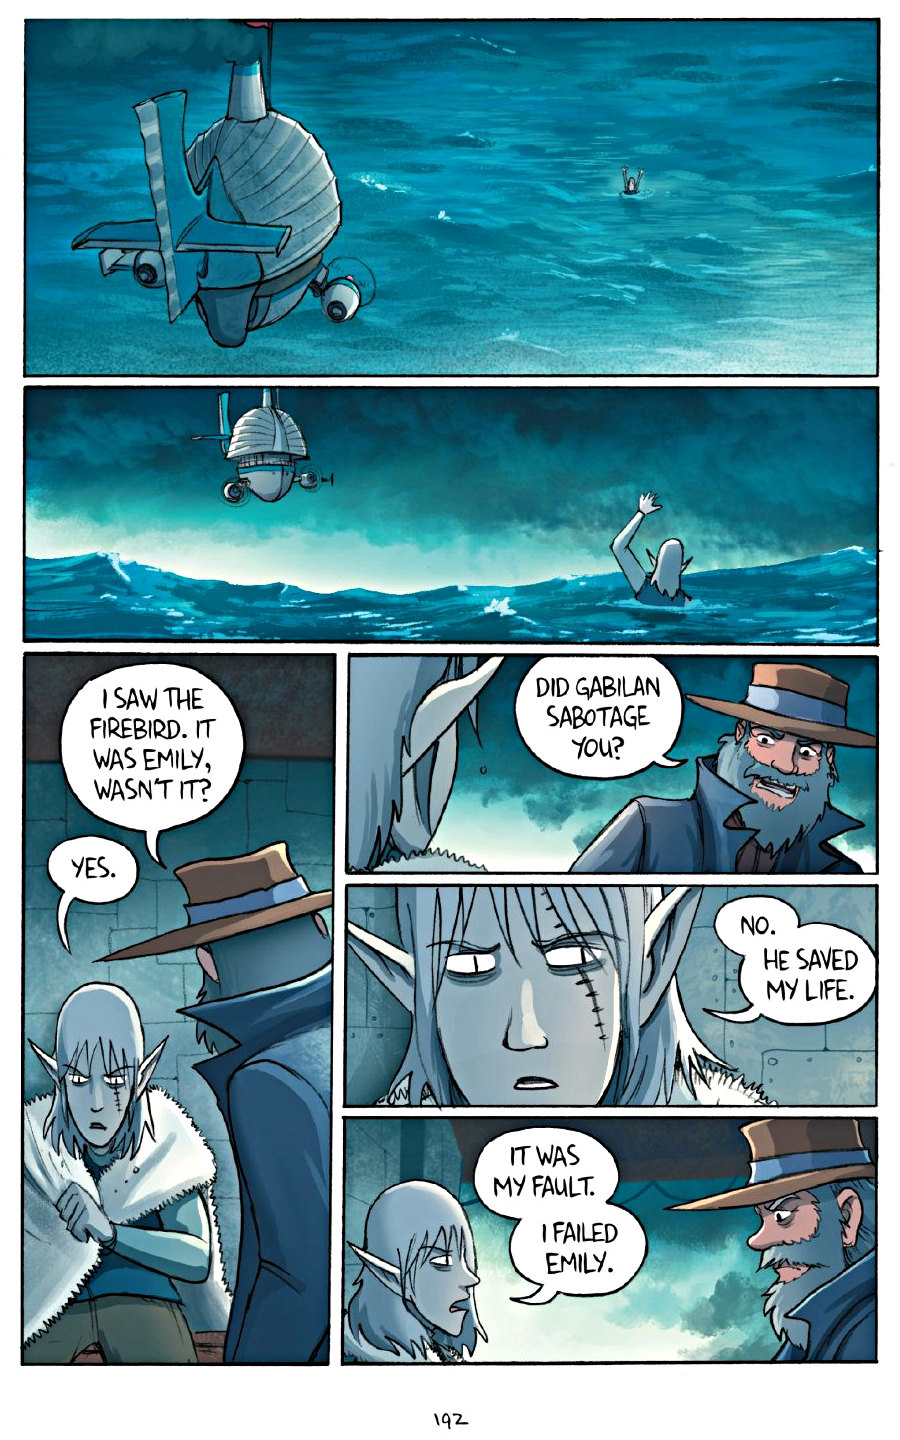 page 192 of amulet 7 firelight graphic novel